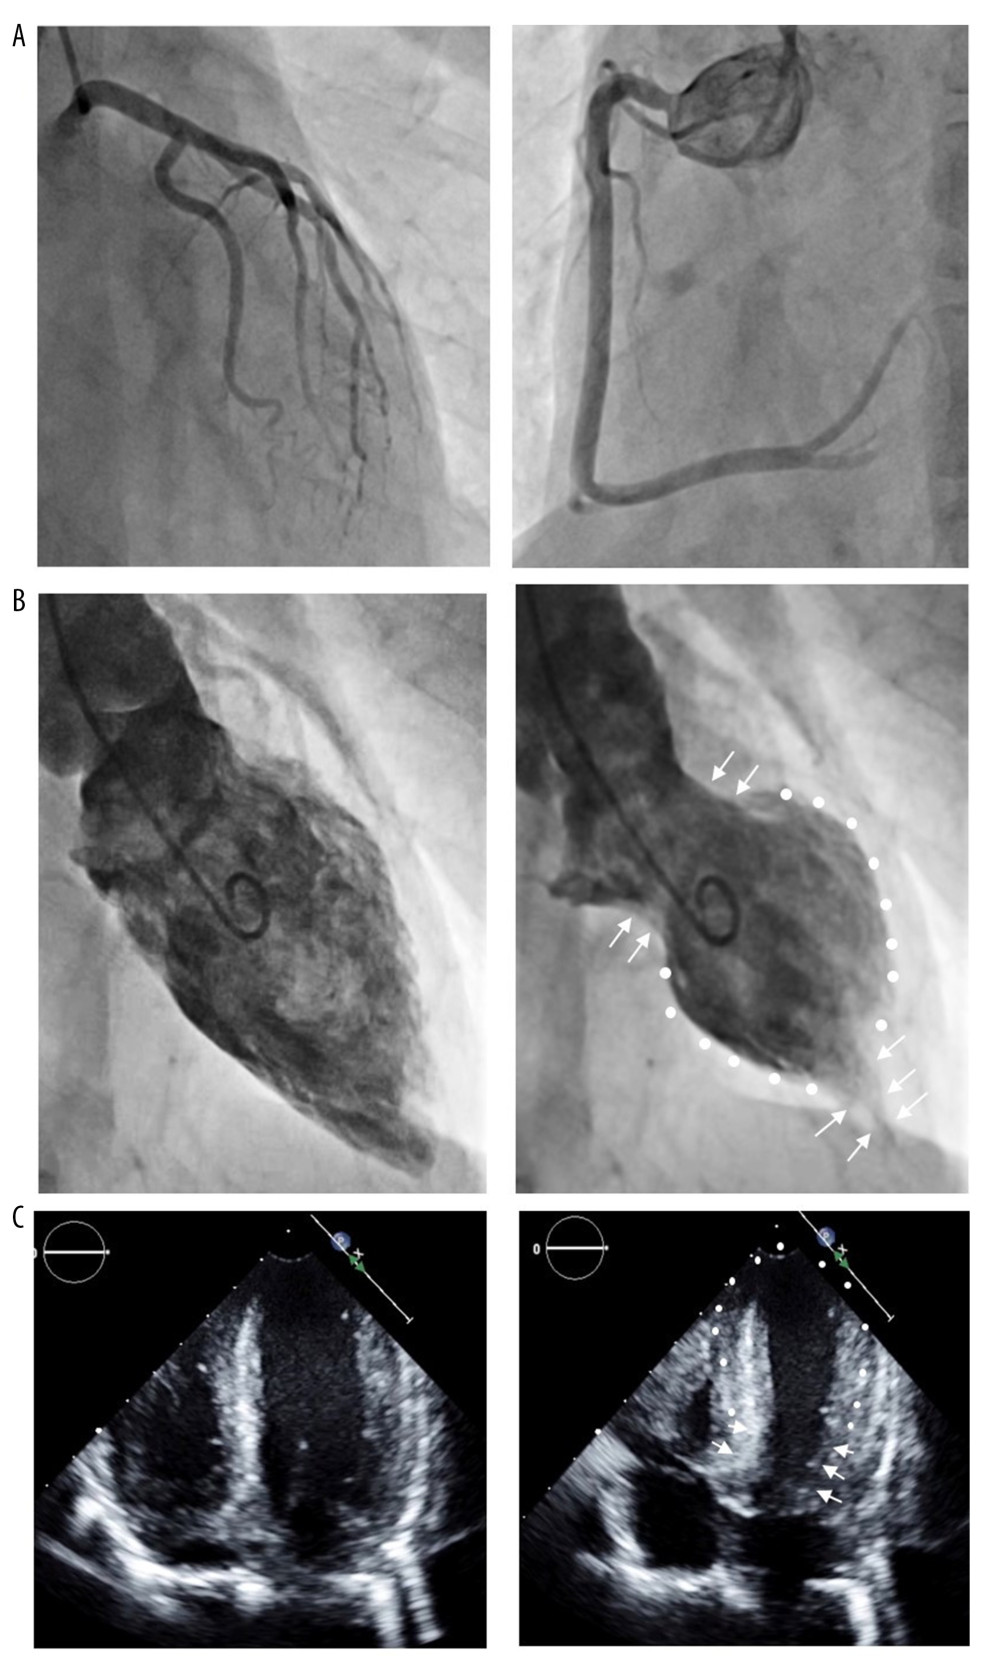 (A) Coronary angiogram of right coronary artery (right side) and left coronary artery (left side). There were no significant stenotic lesions. (B) Left ventricular (LV) angiogram of end-diastolic phase (left side) and end-systolic phase (right side). LV wall motion was decreased in the middle of LV (white dots) and the hyperkinetic motion was seen in the base and apical portion of the LV (white arrows). (C) Transthoracic echocardiogram of LV of end-diastolic phase (left side) and endsystolic phase (right side) 1 week after the onset. LV wall motion showed that a typical pattern of the apical ballooning was observed (white dots) and the hyperkinetic motion was seen in the base of the LV (white arrows).